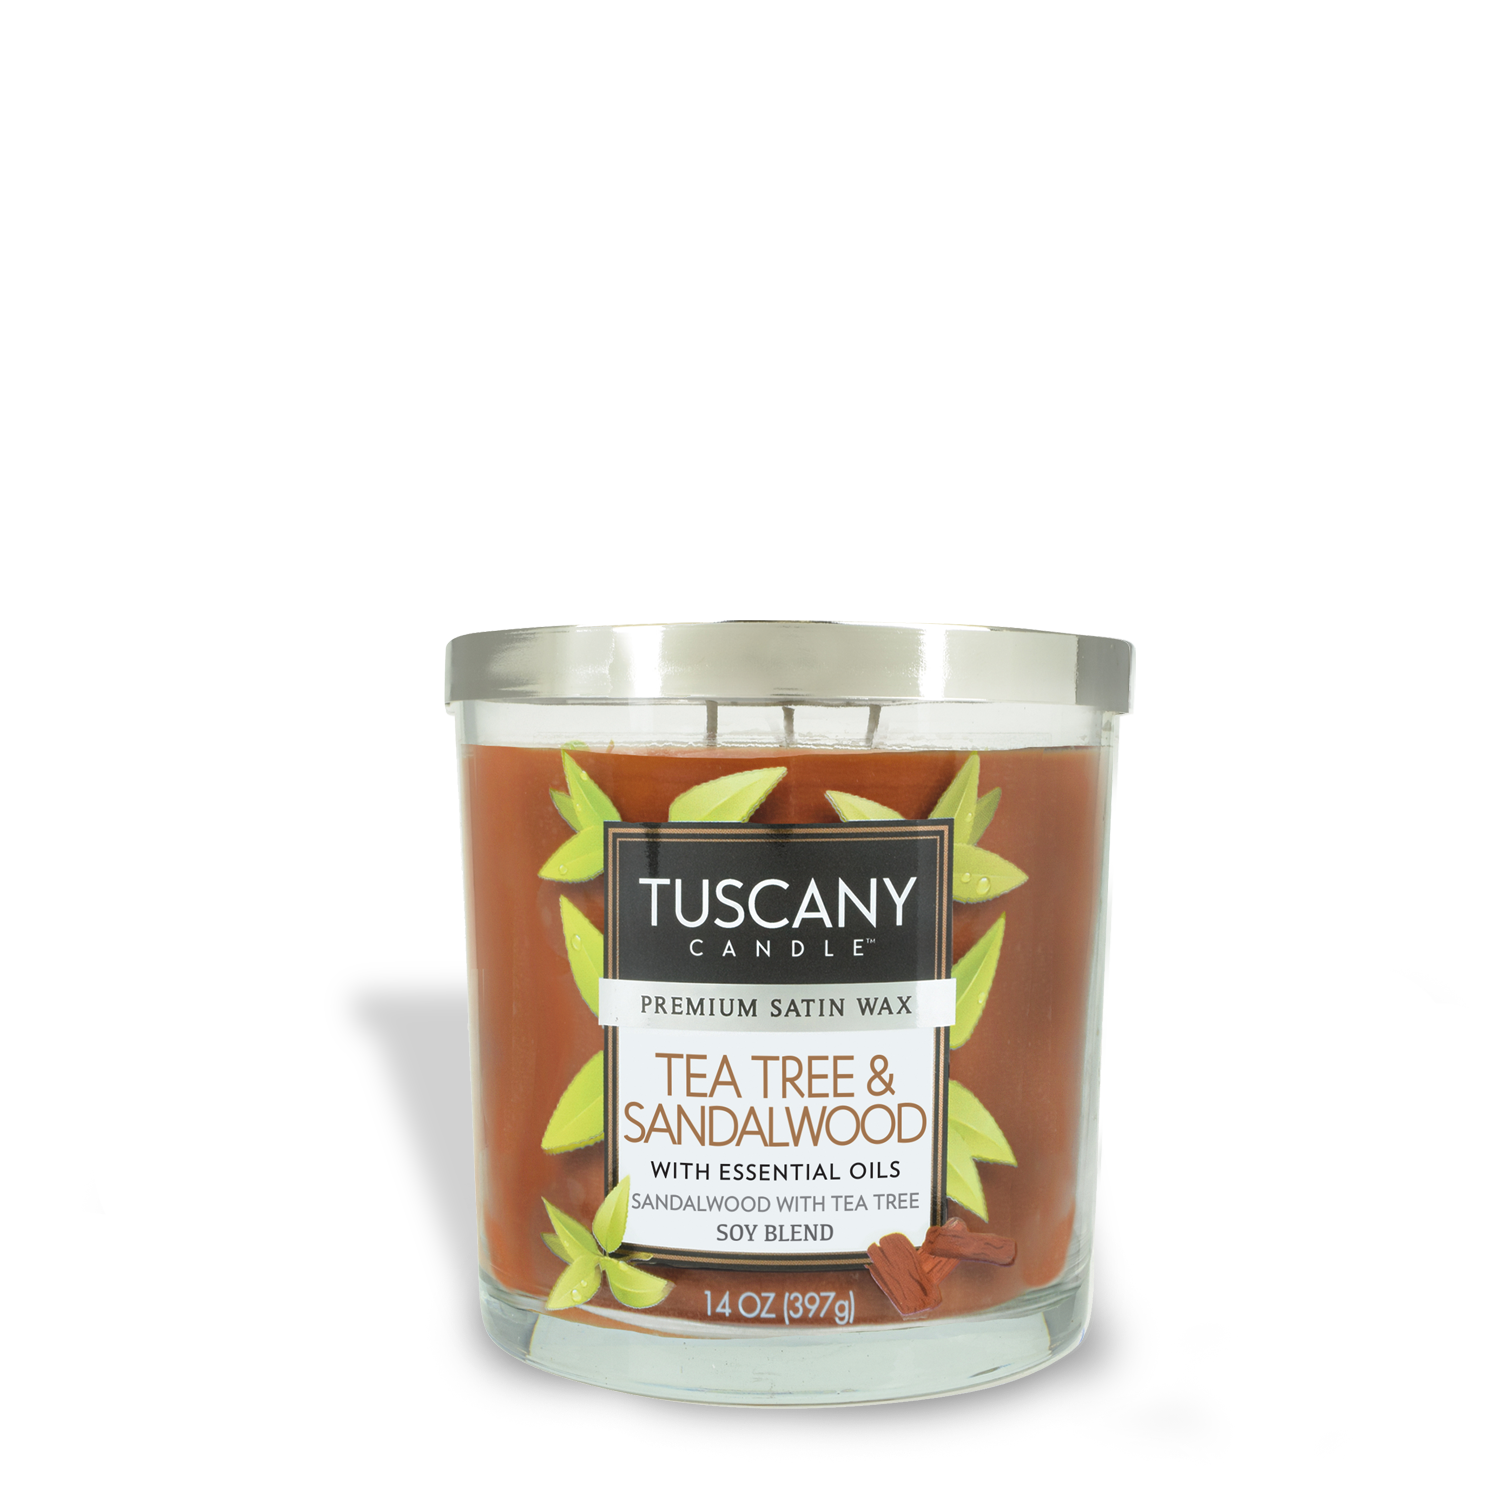 Tuscany Candle Tea Tree & Sandalwood Long-Lasting Scented Jar Candle (14 oz) featuring the aromatic blend of tea tree and sandalwood.